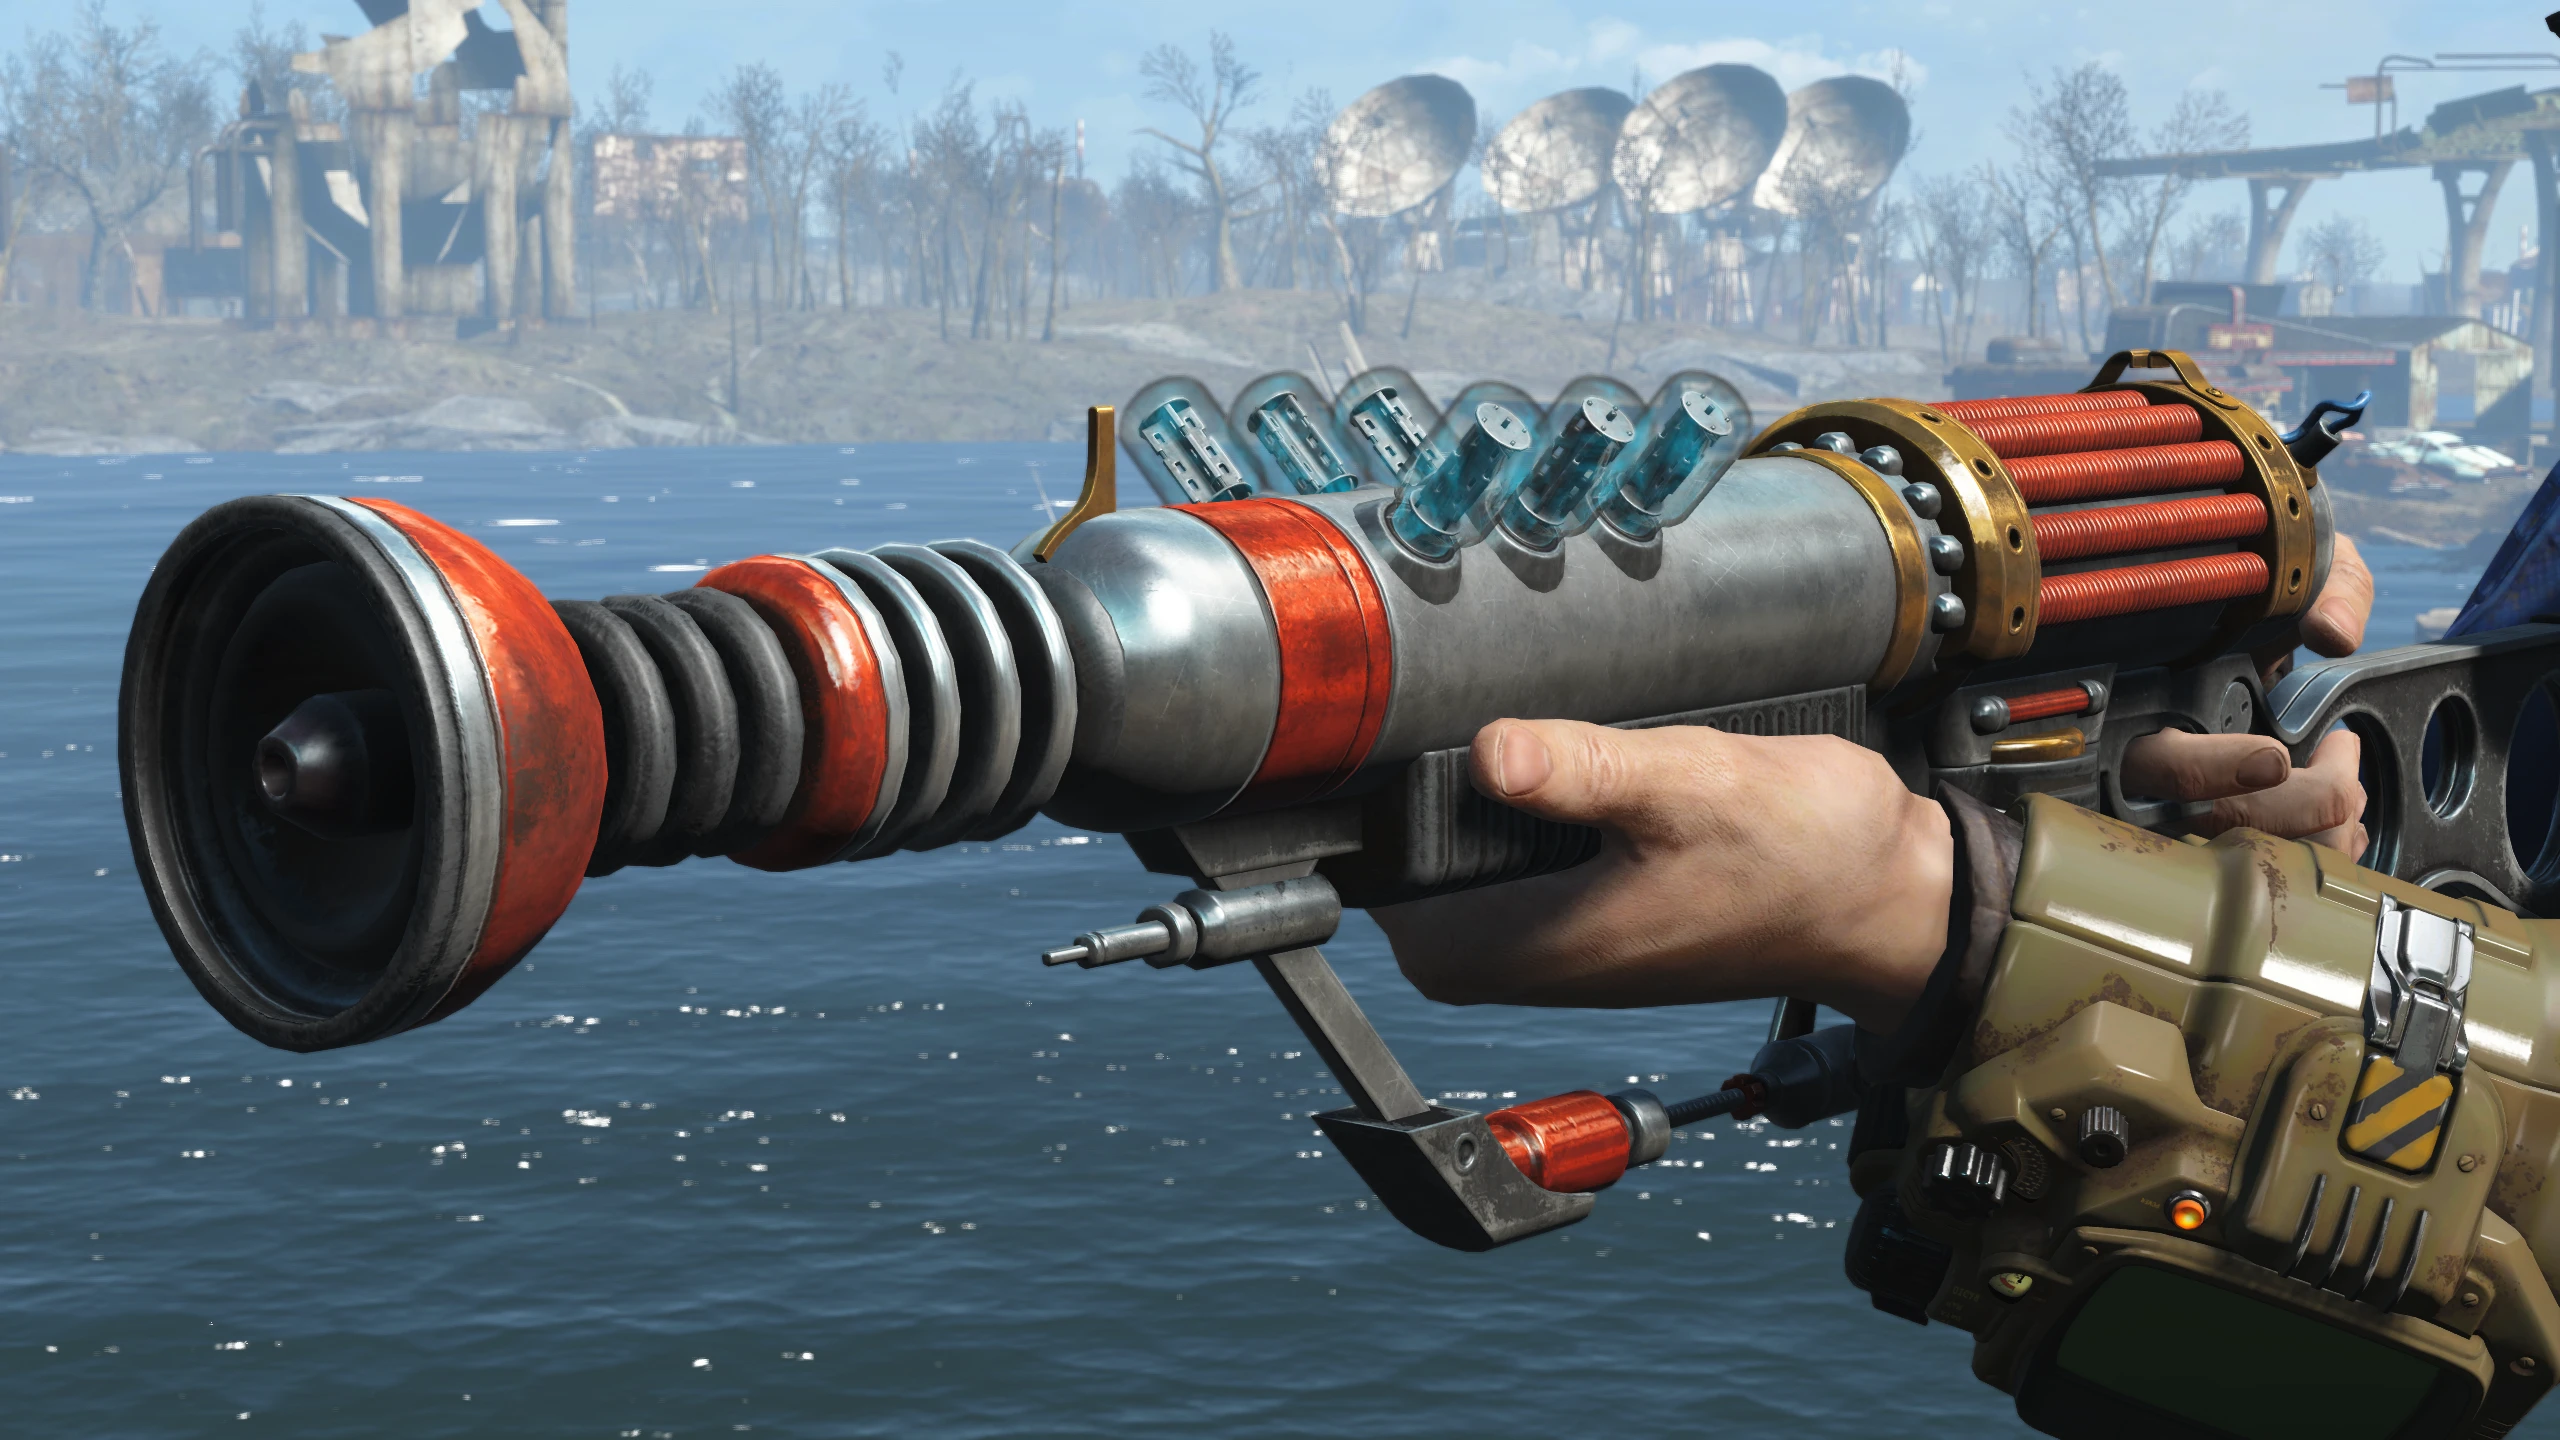 Energy weapon fallout 4 фото 83